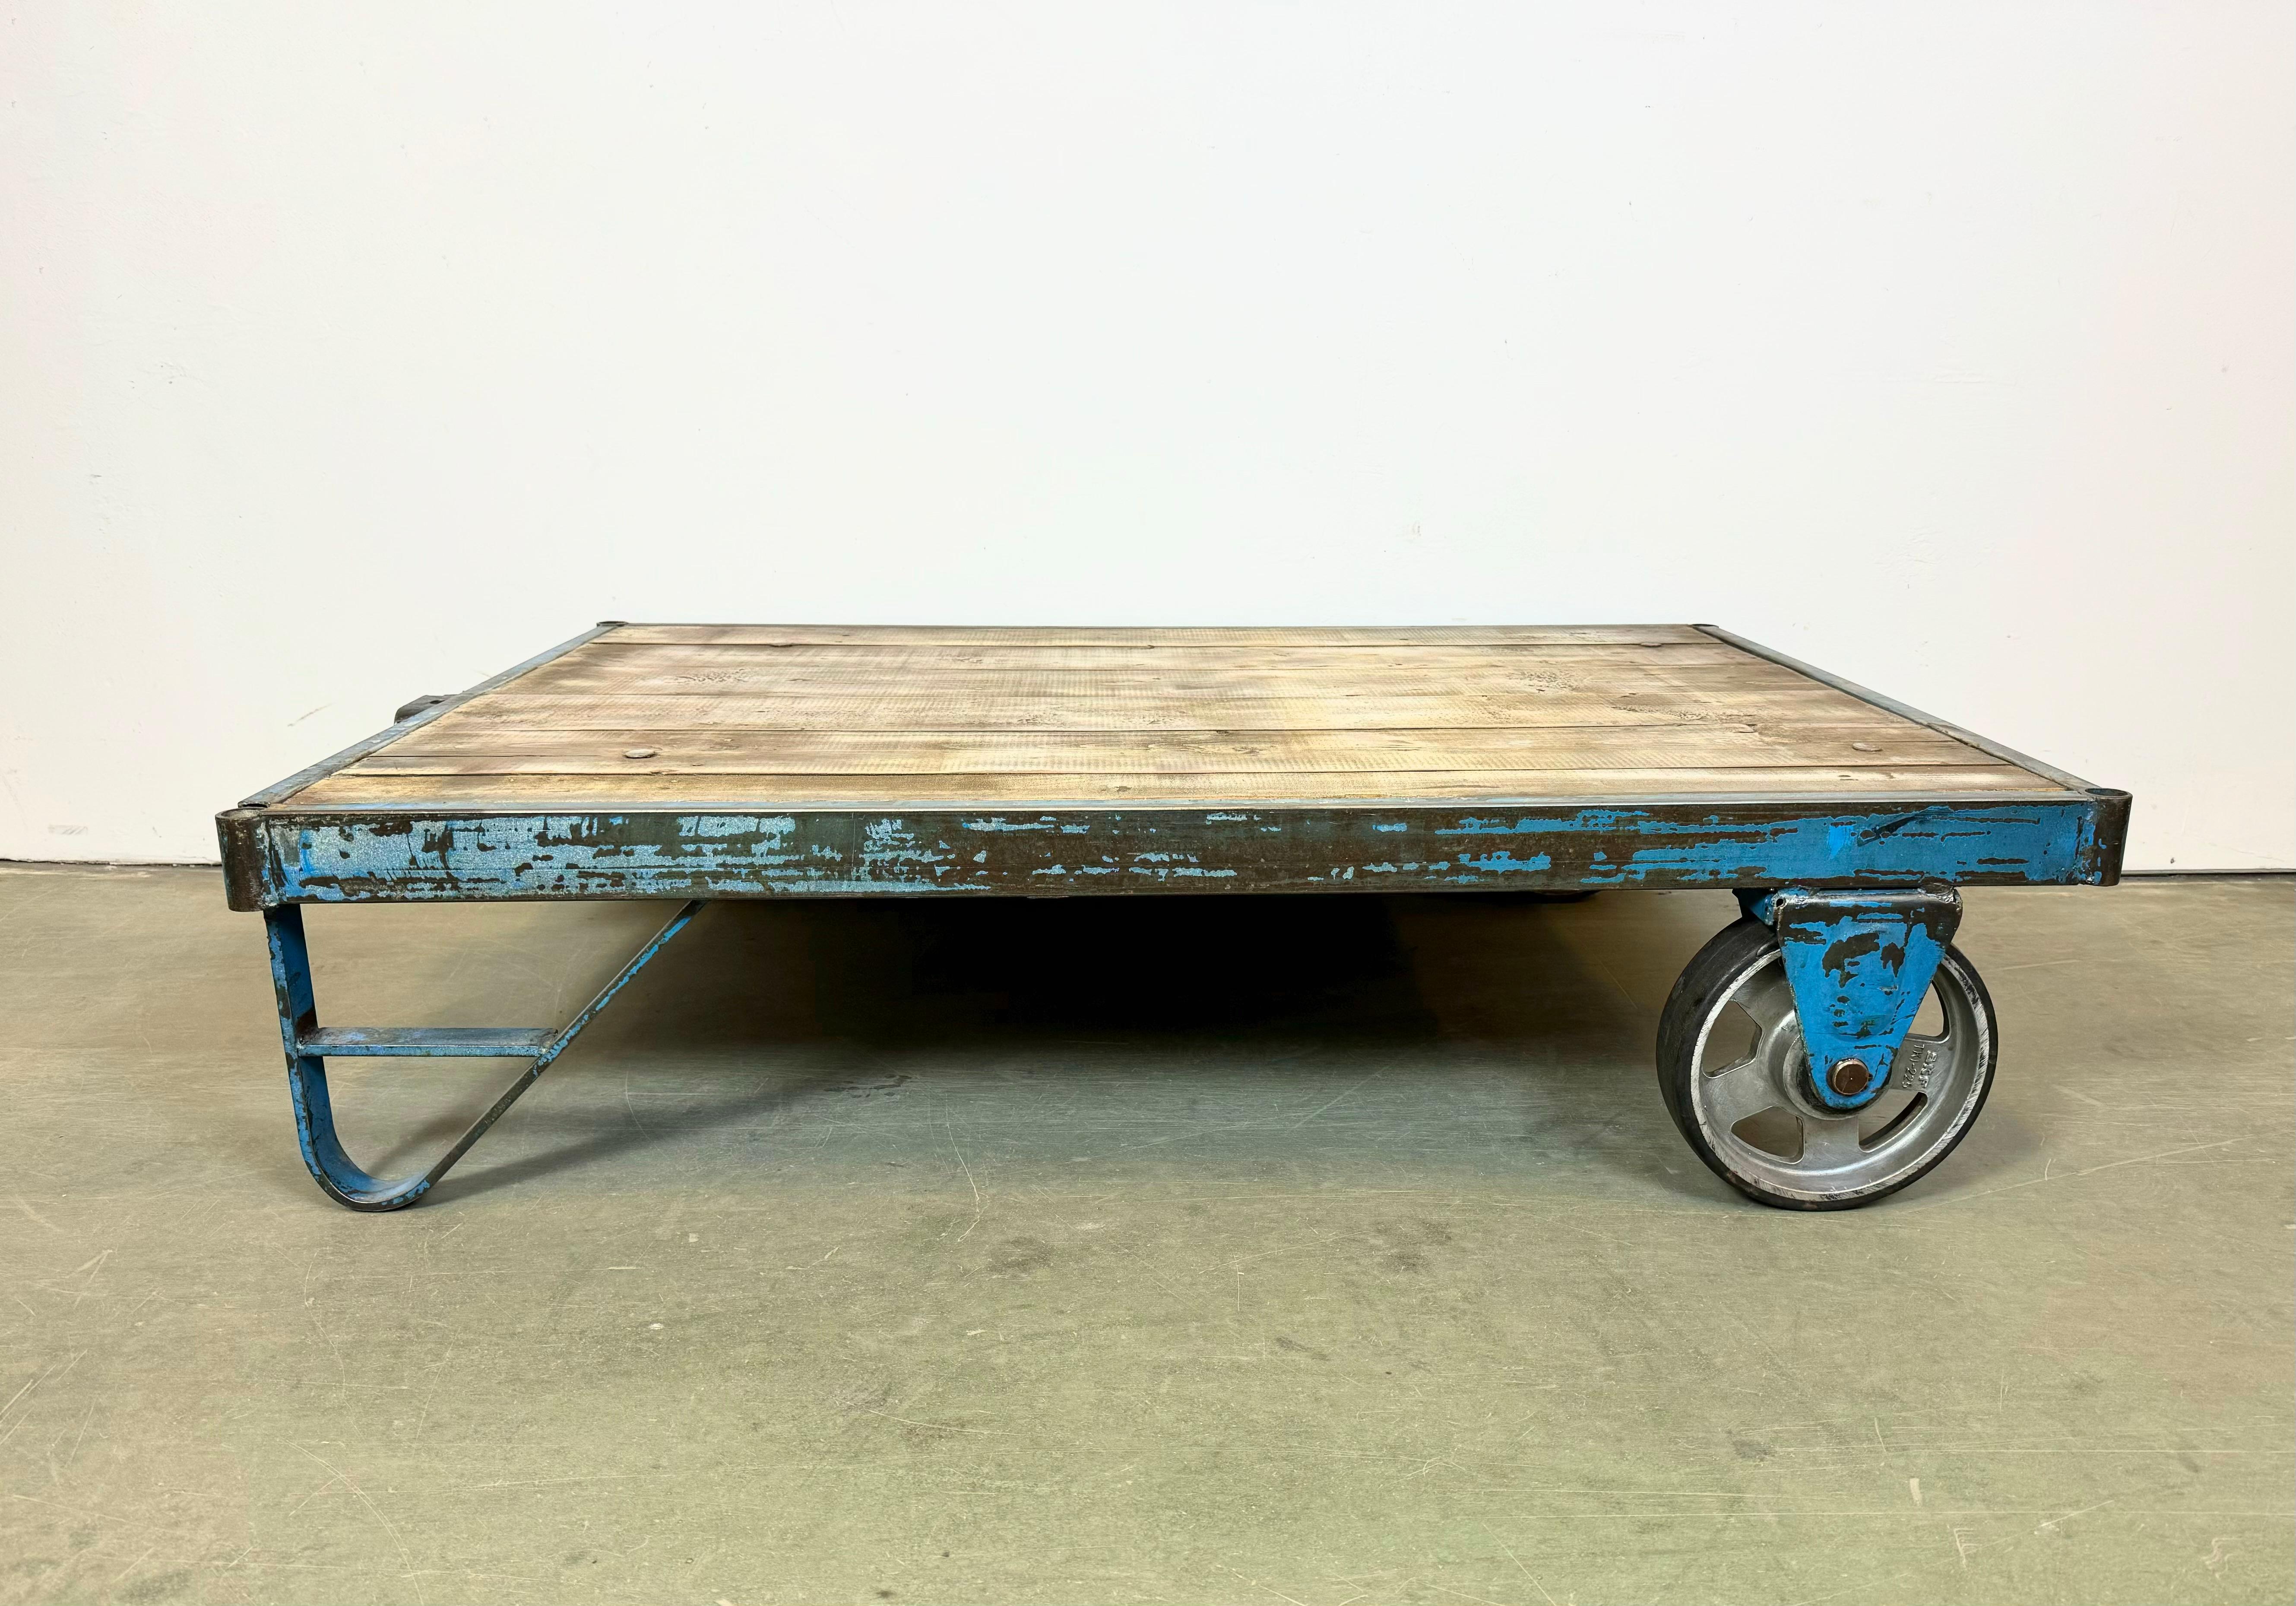 Former pallet truck from a factory now serves as a coffee table. It features a blue iron construction with two original wheels and solid wooden plate. The weight of the table is 40 kg.